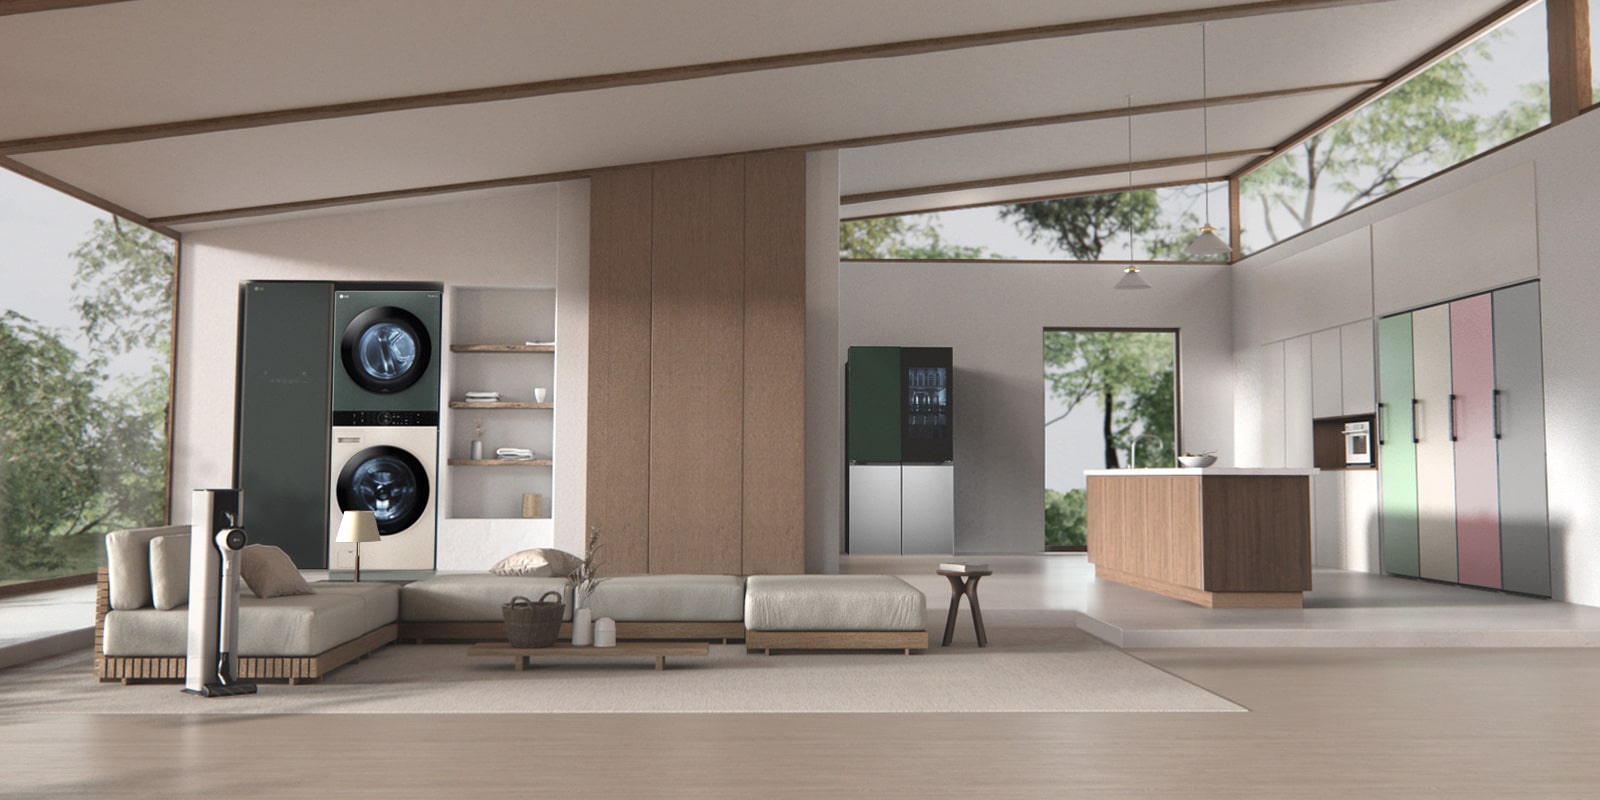 It shows the LG object collection products placed in the living room- styler, refrigerator, wash tower, etc. 